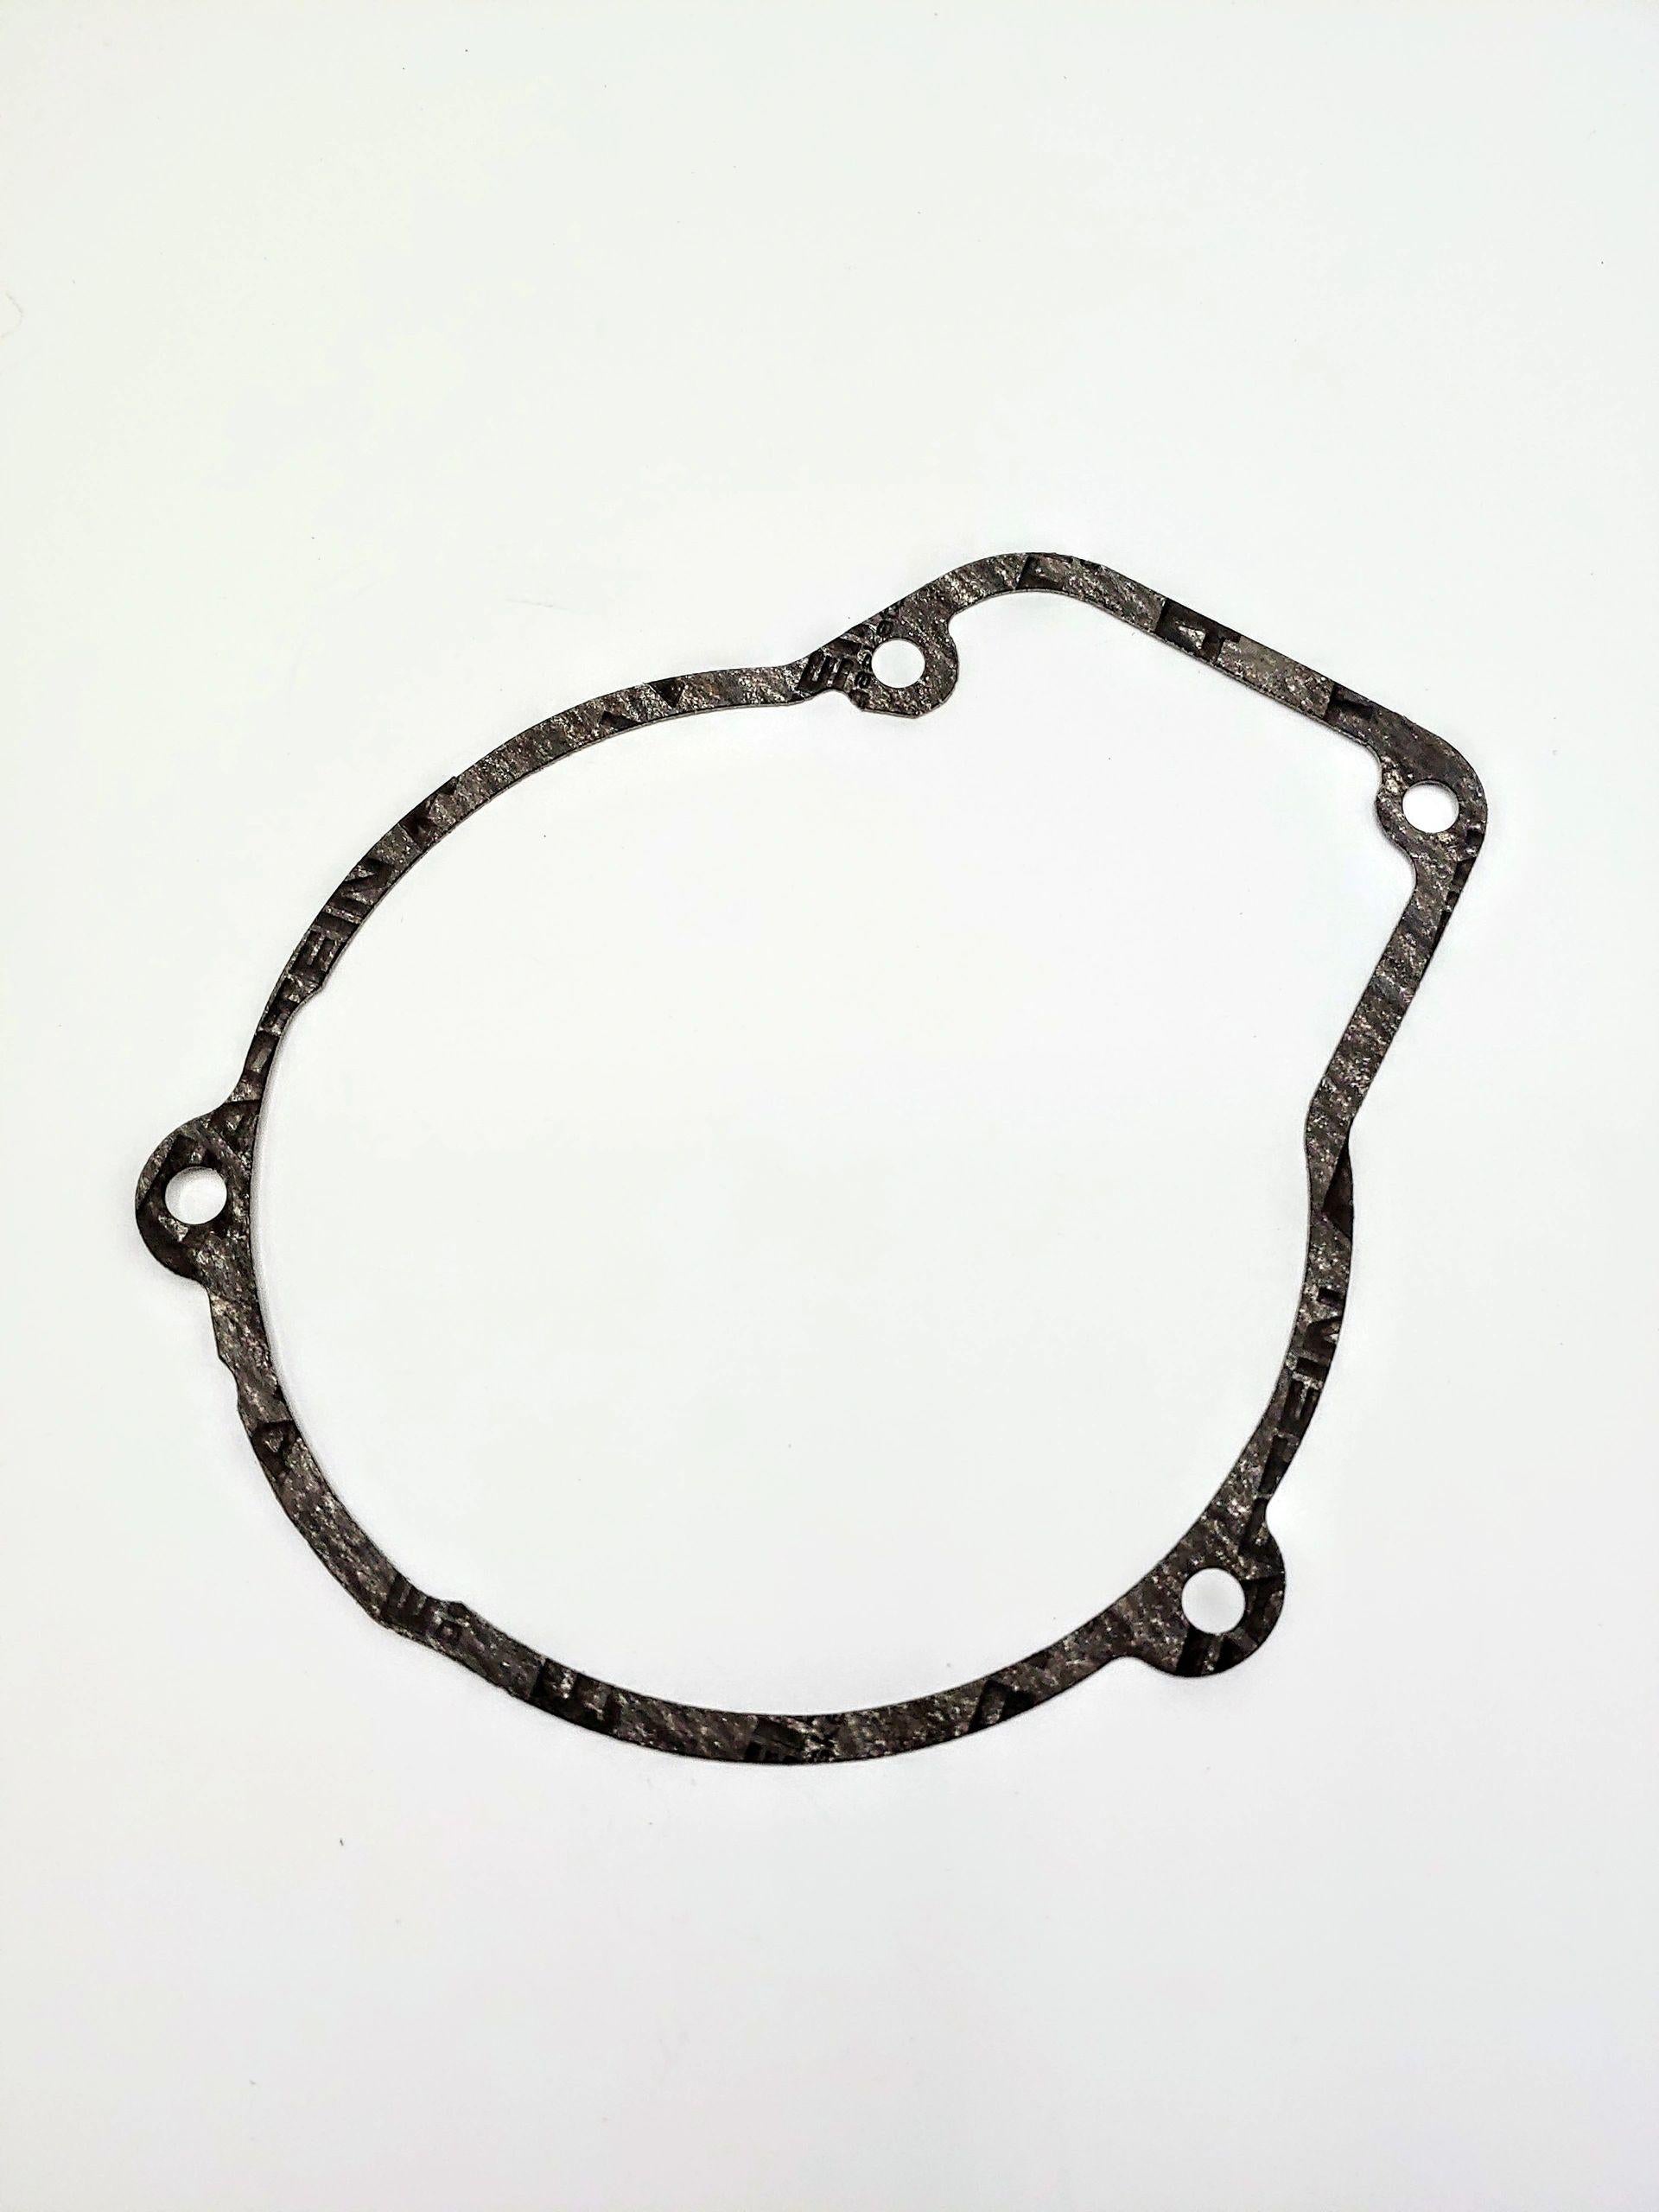 Ignition Cover Gasket - ME94500GG-CAB-1